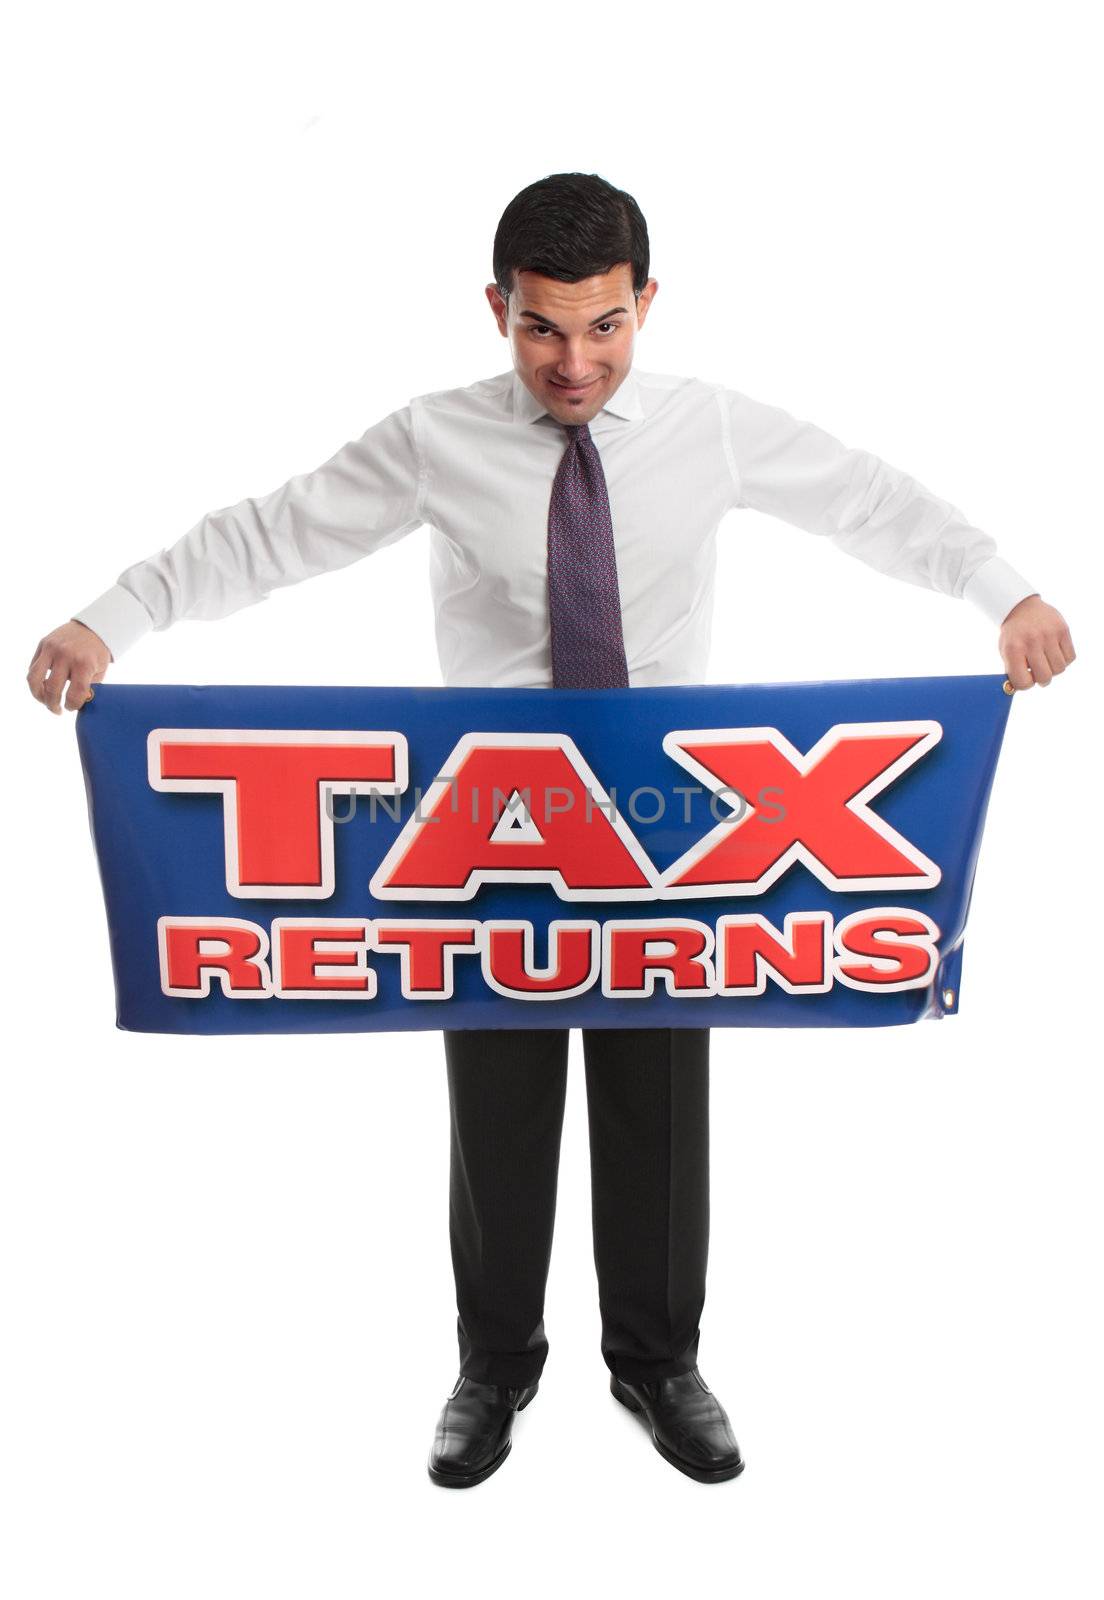 Business man, accountant or taxman standing and holding a Tax Return sign message.  Or replace with your own message.  focus to sign.  White background.